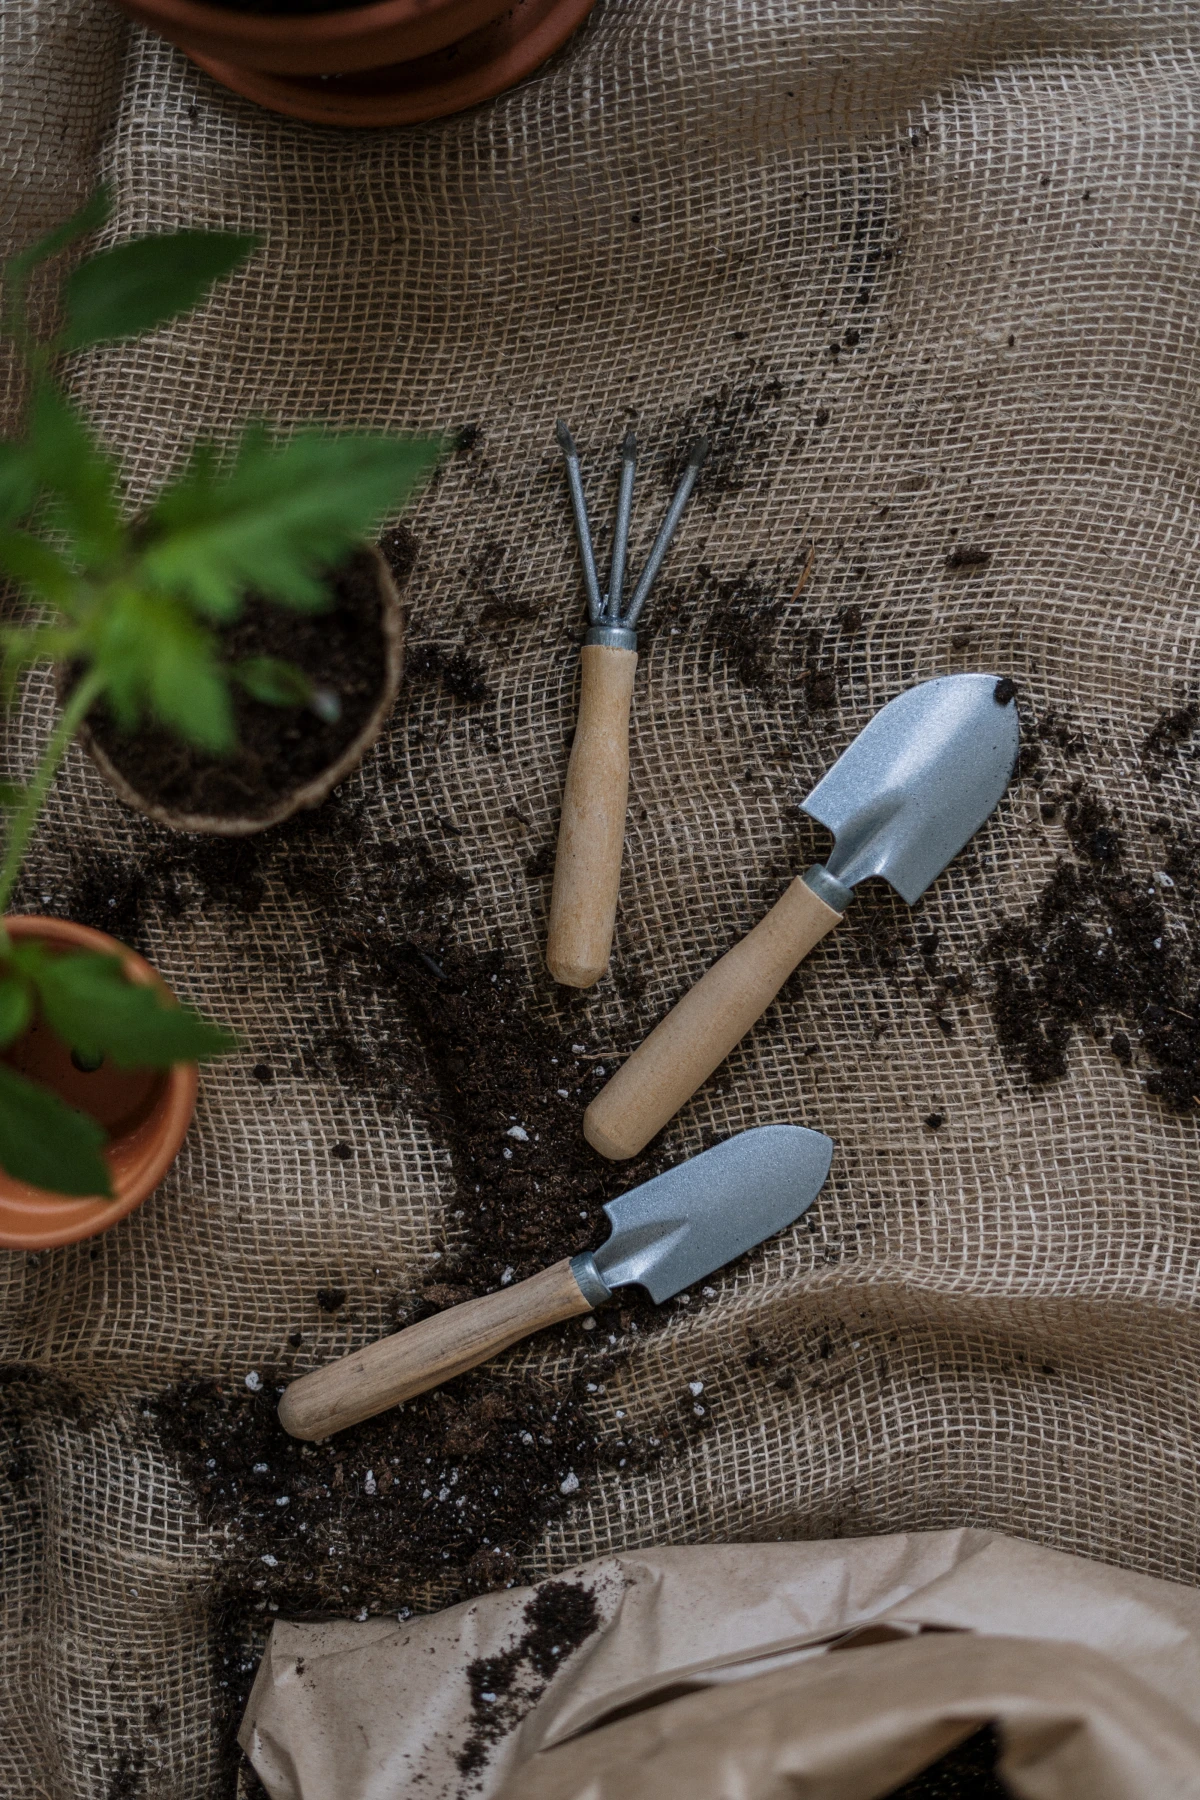 gardening tools and soil